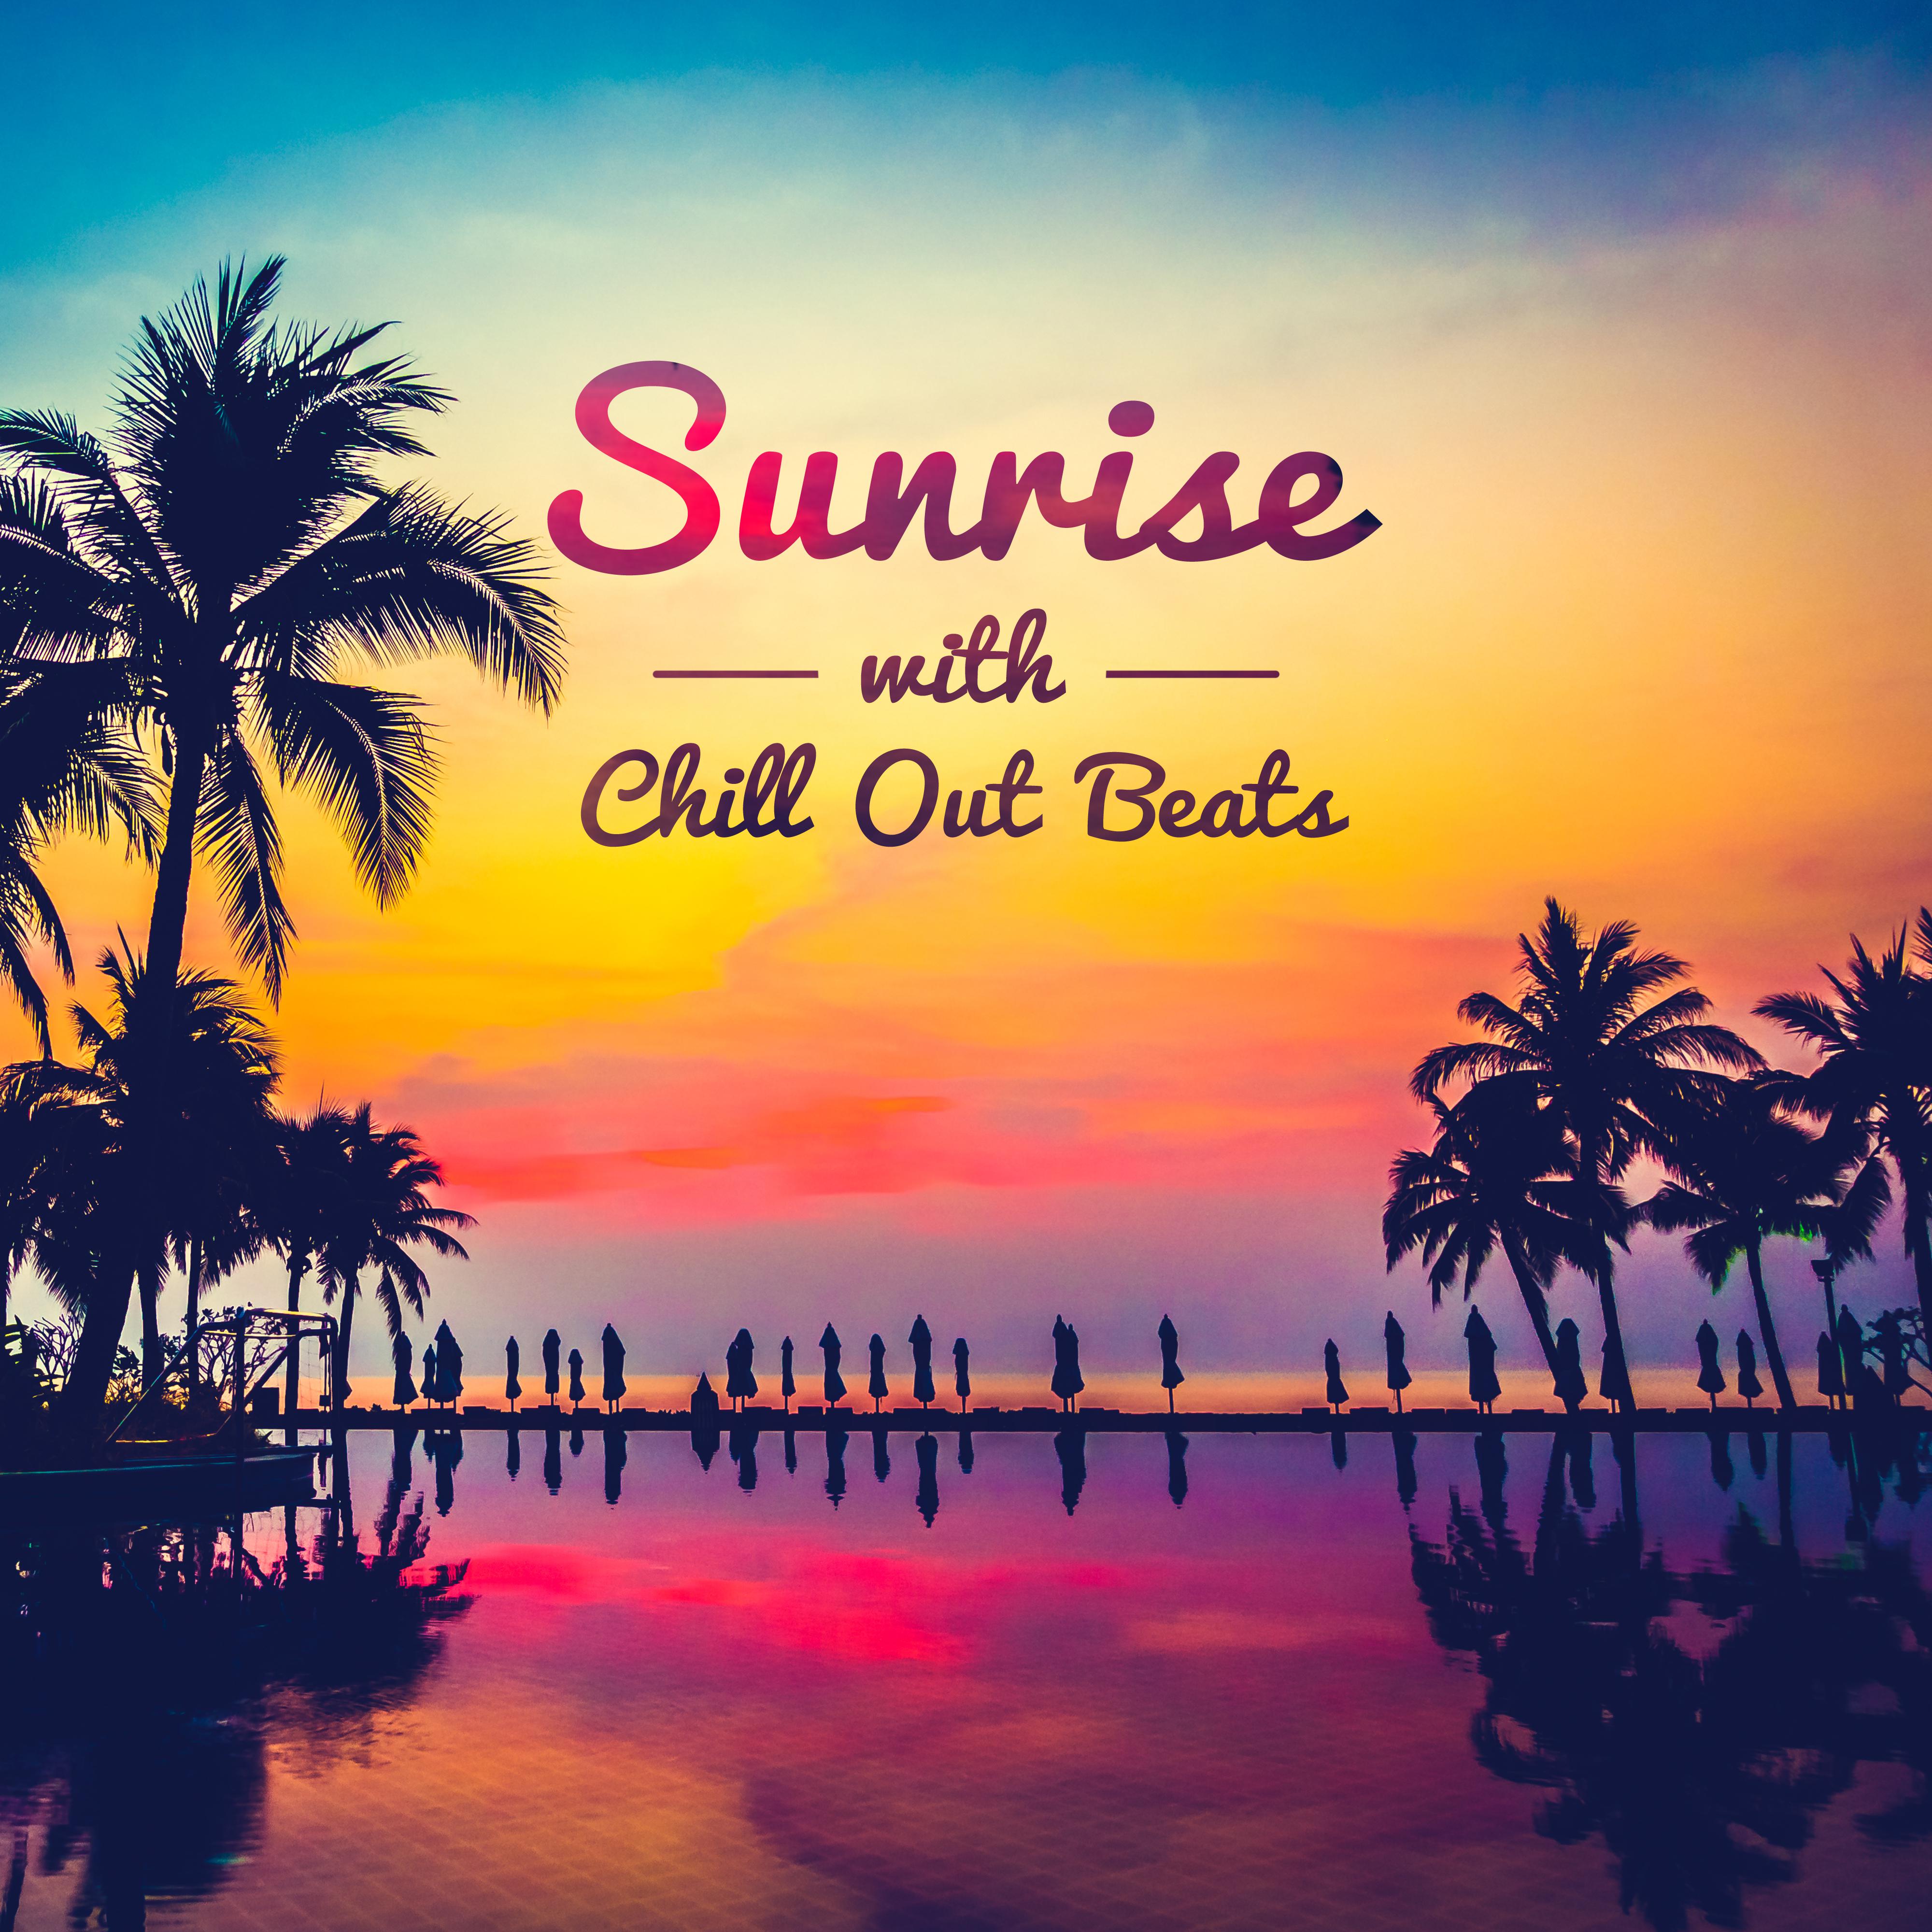 Sunrise with Chill Out Beats